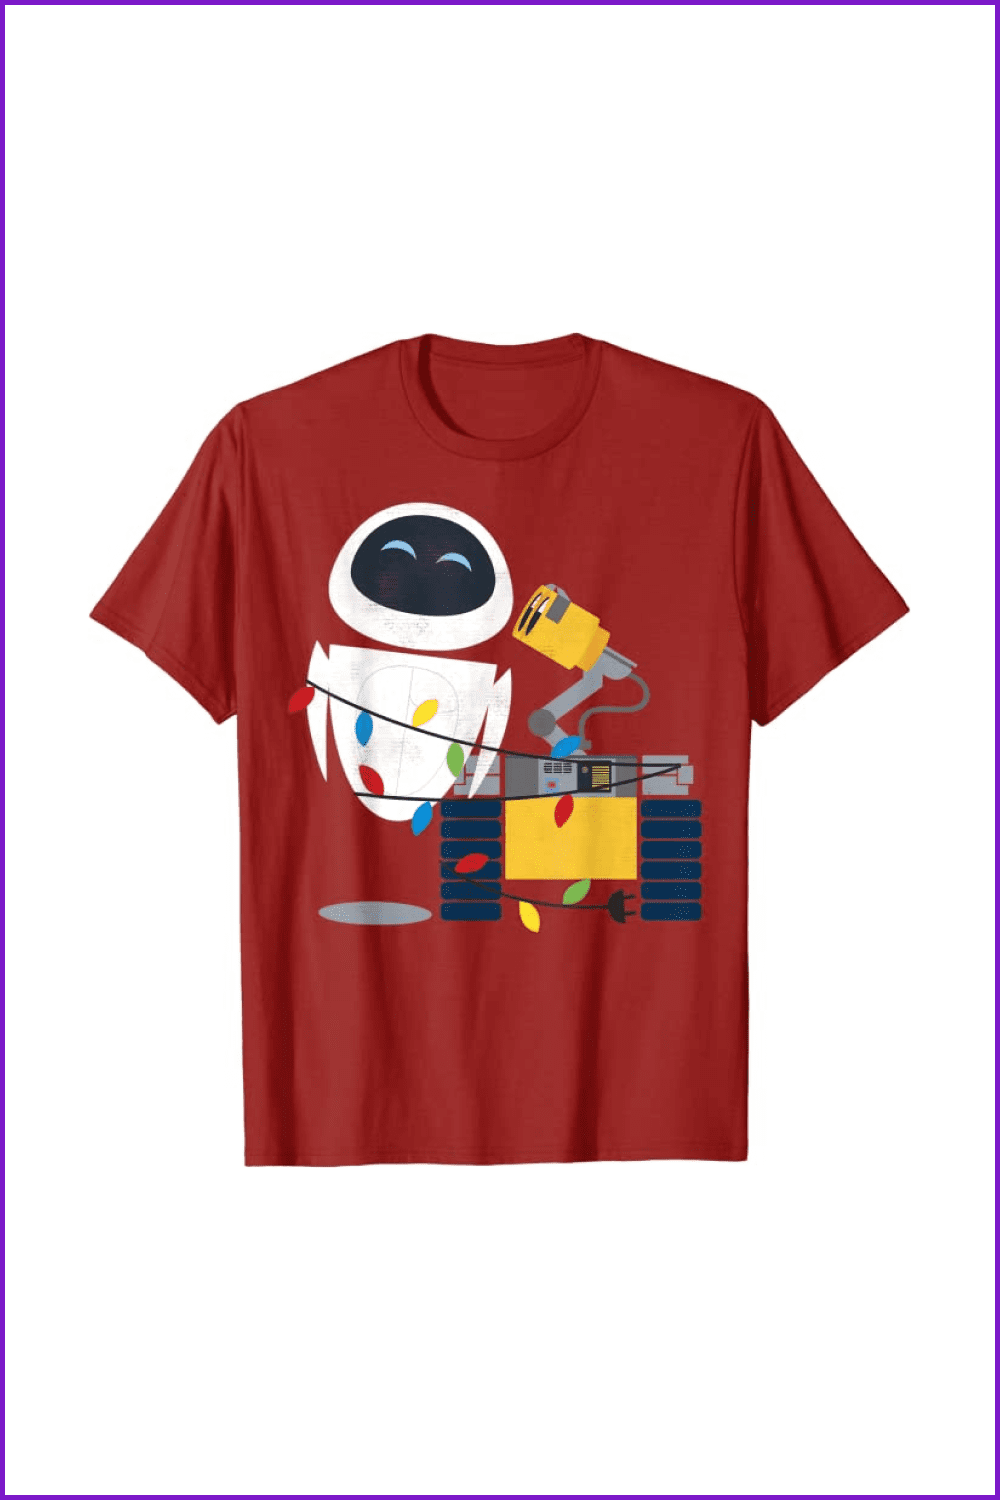 Red t-shirt with Wall-E and Christmas lights.